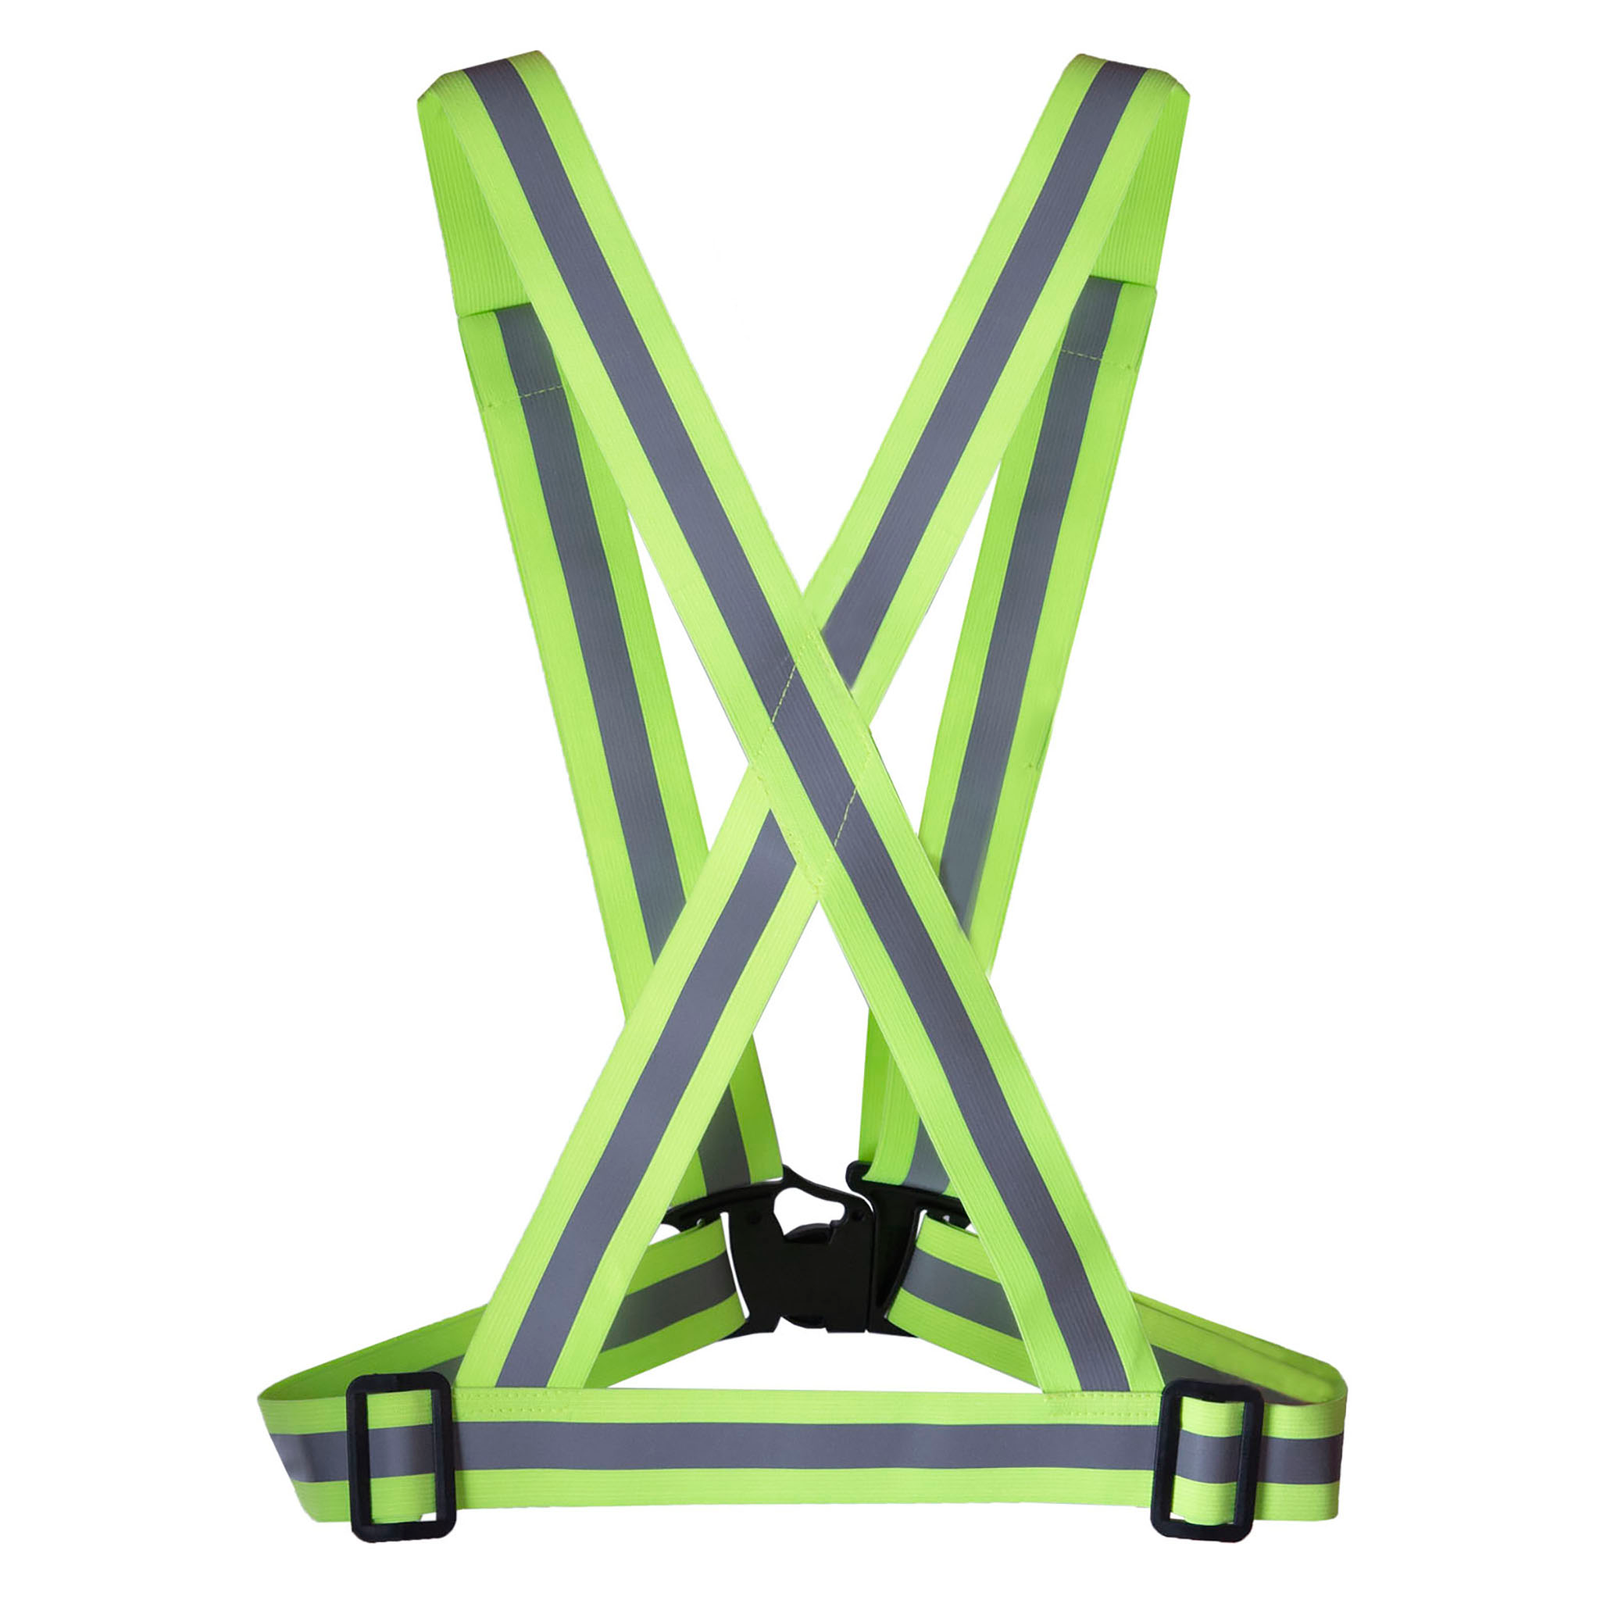 Back view of the Lime Hi Vis suspenders with reflective strips